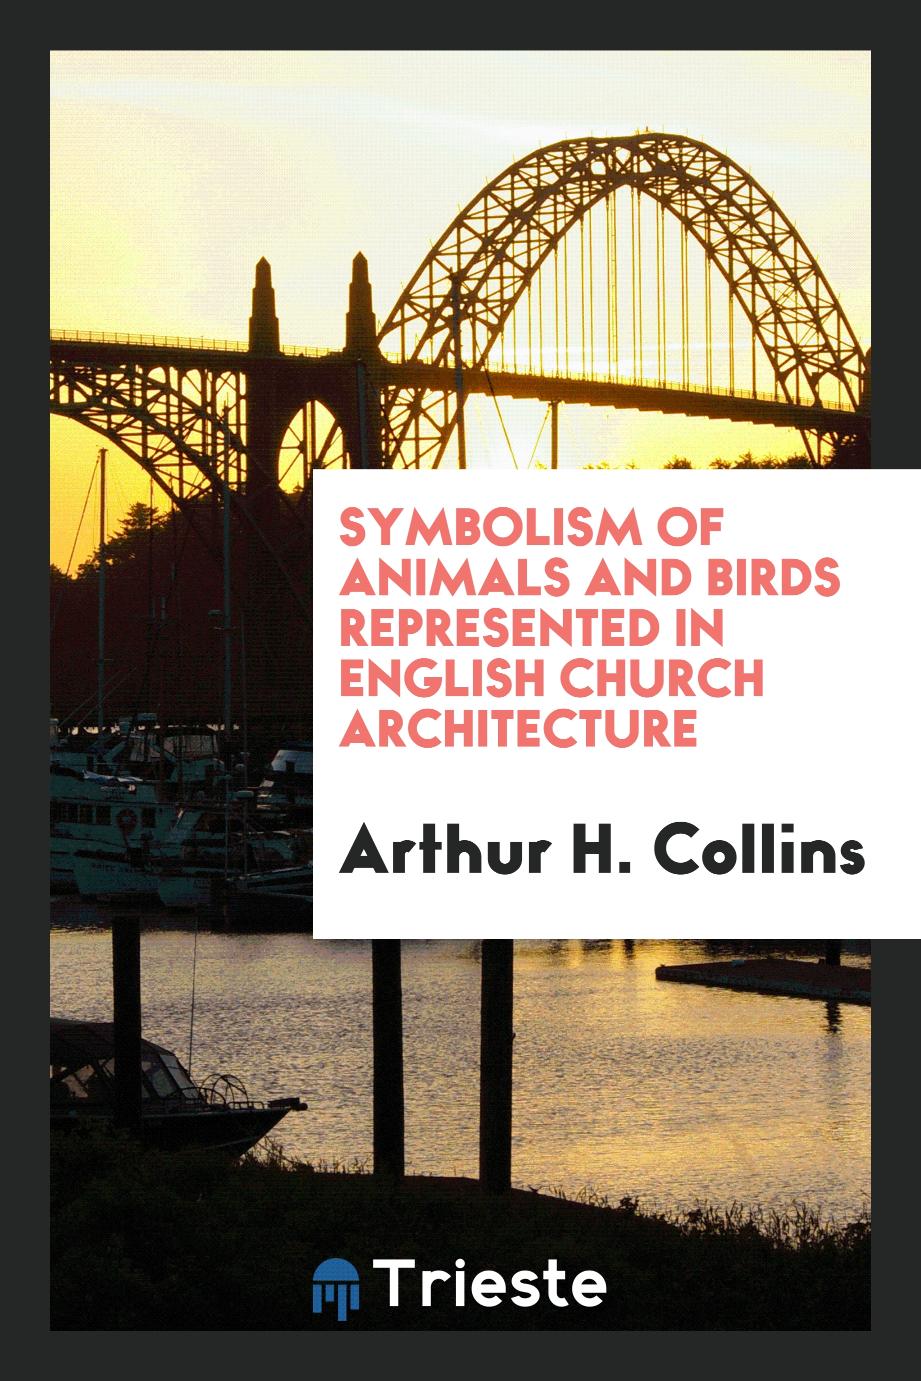 Symbolism of animals and birds represented in English church architecture